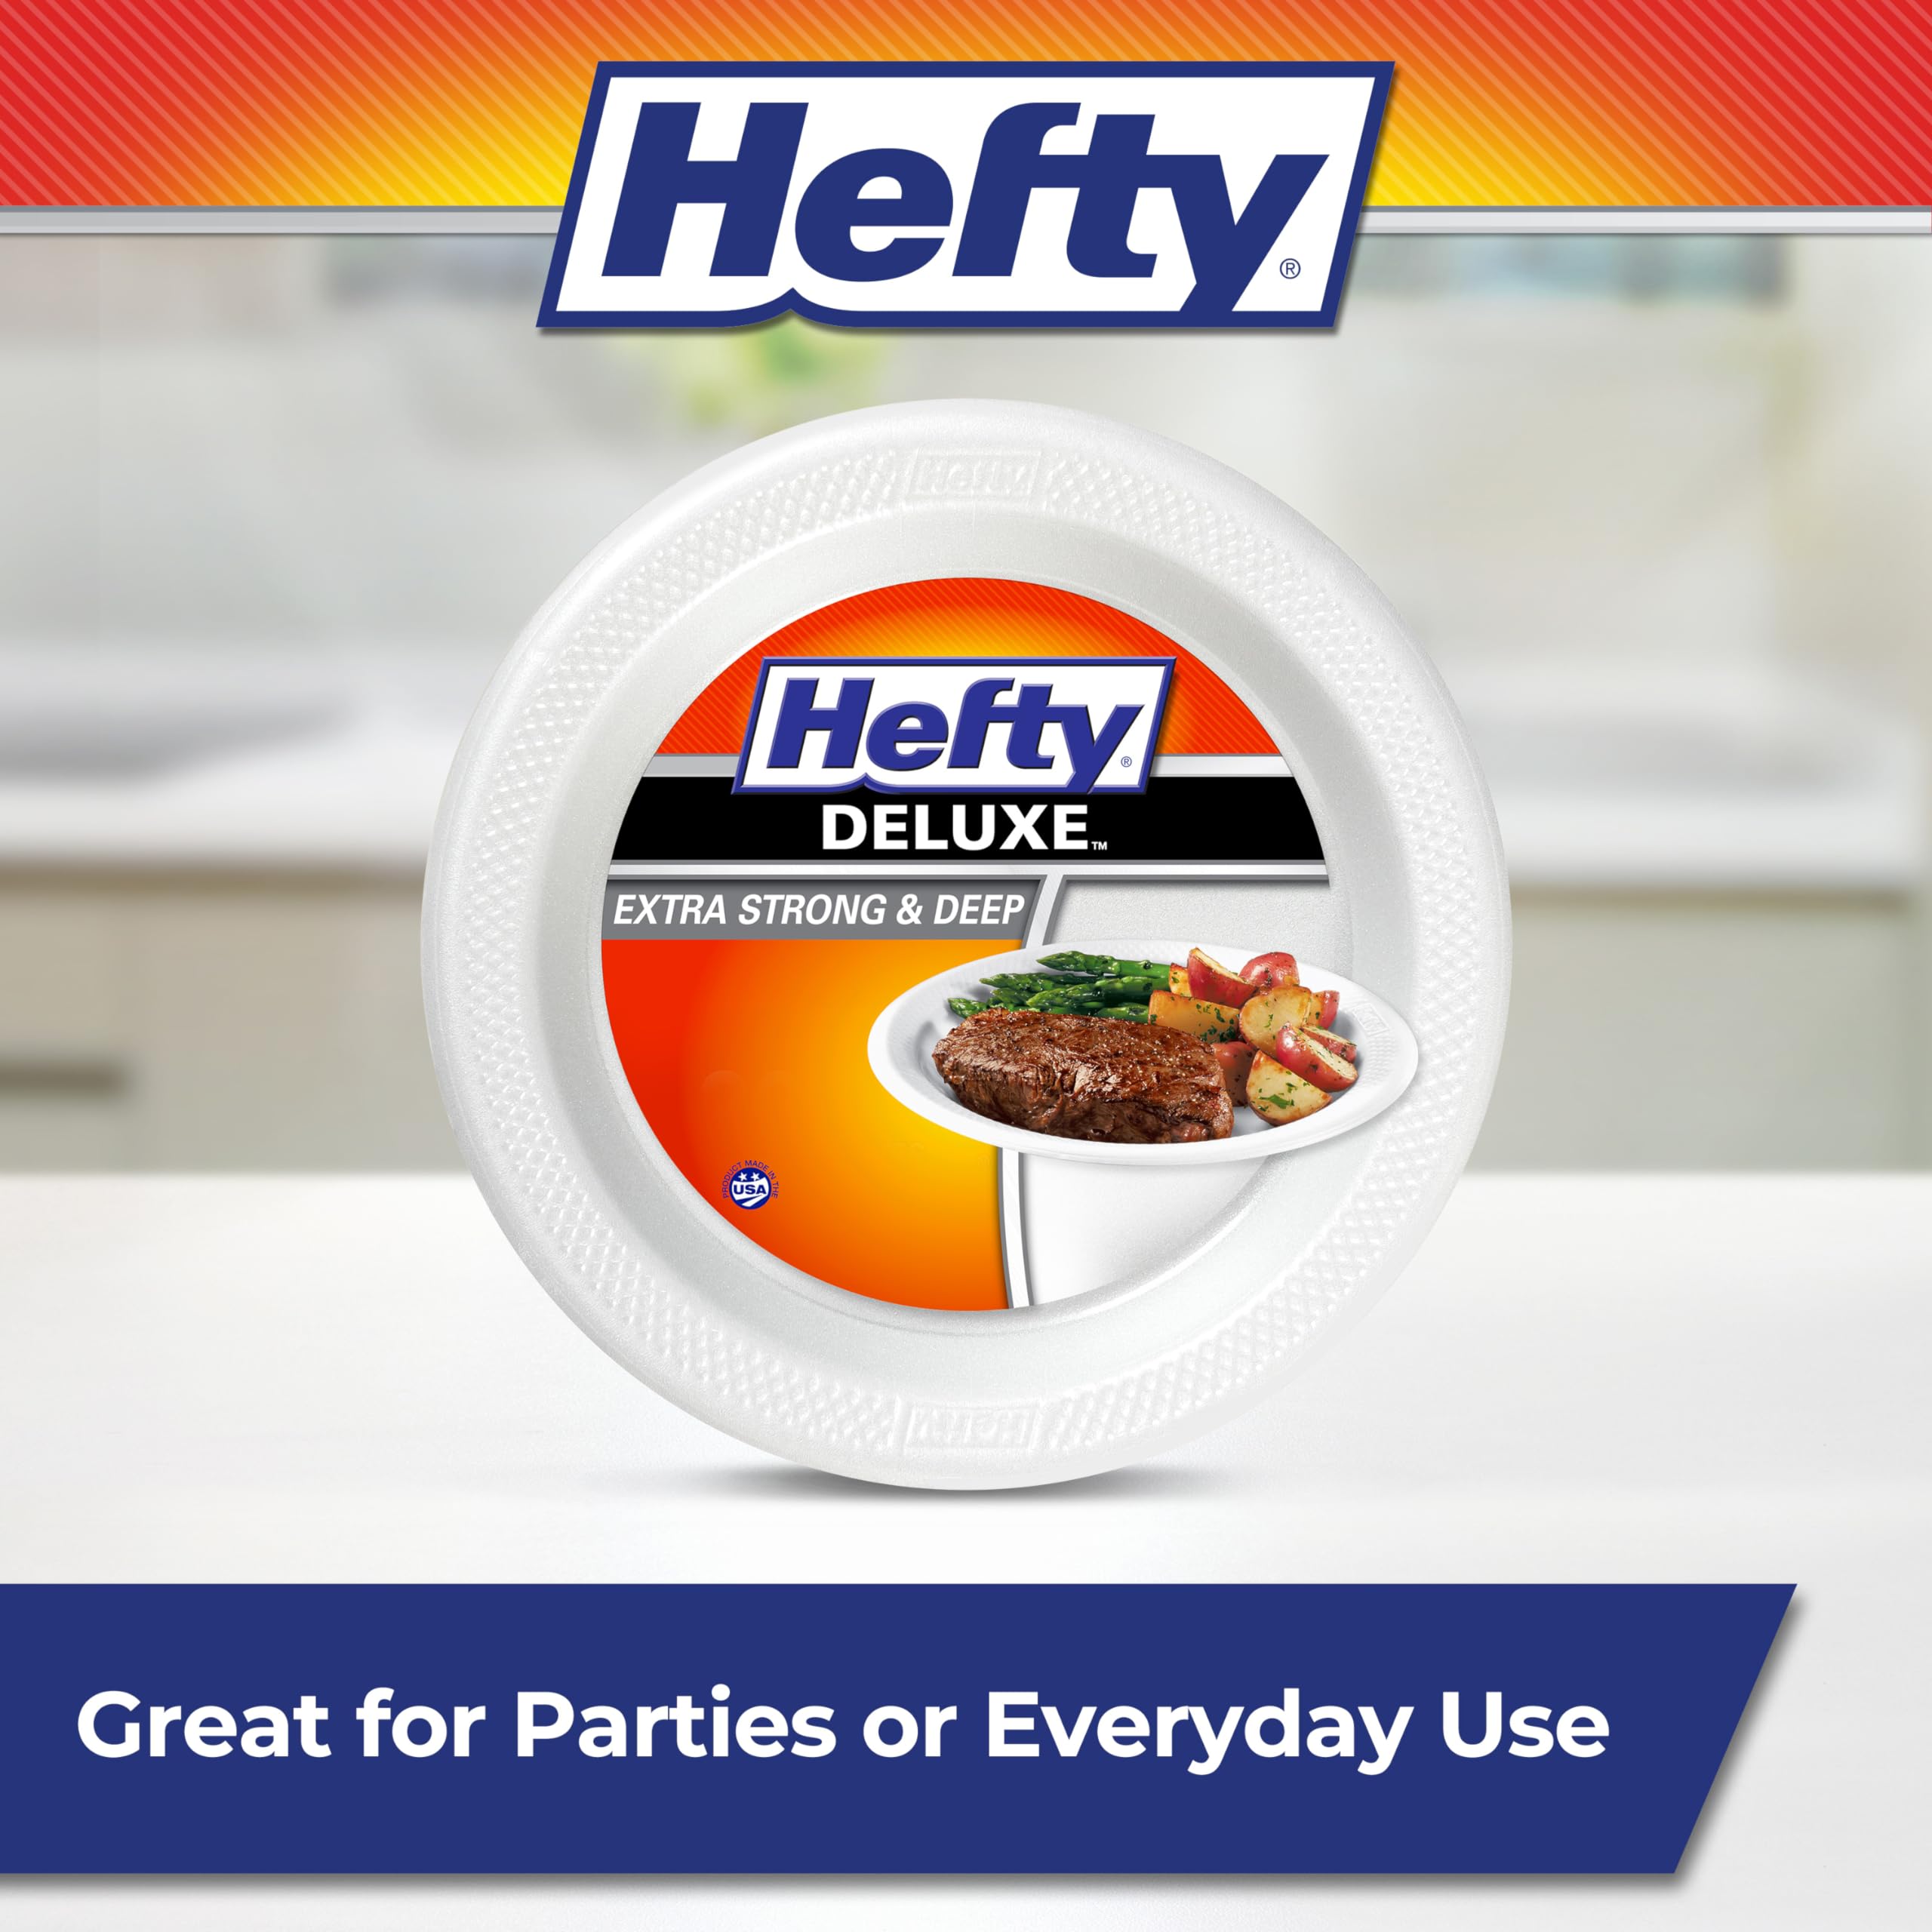 Hefty Deluxe Extra Strong & Deep Foam Plates, Round, White, 10.25 Inch, 15 Count